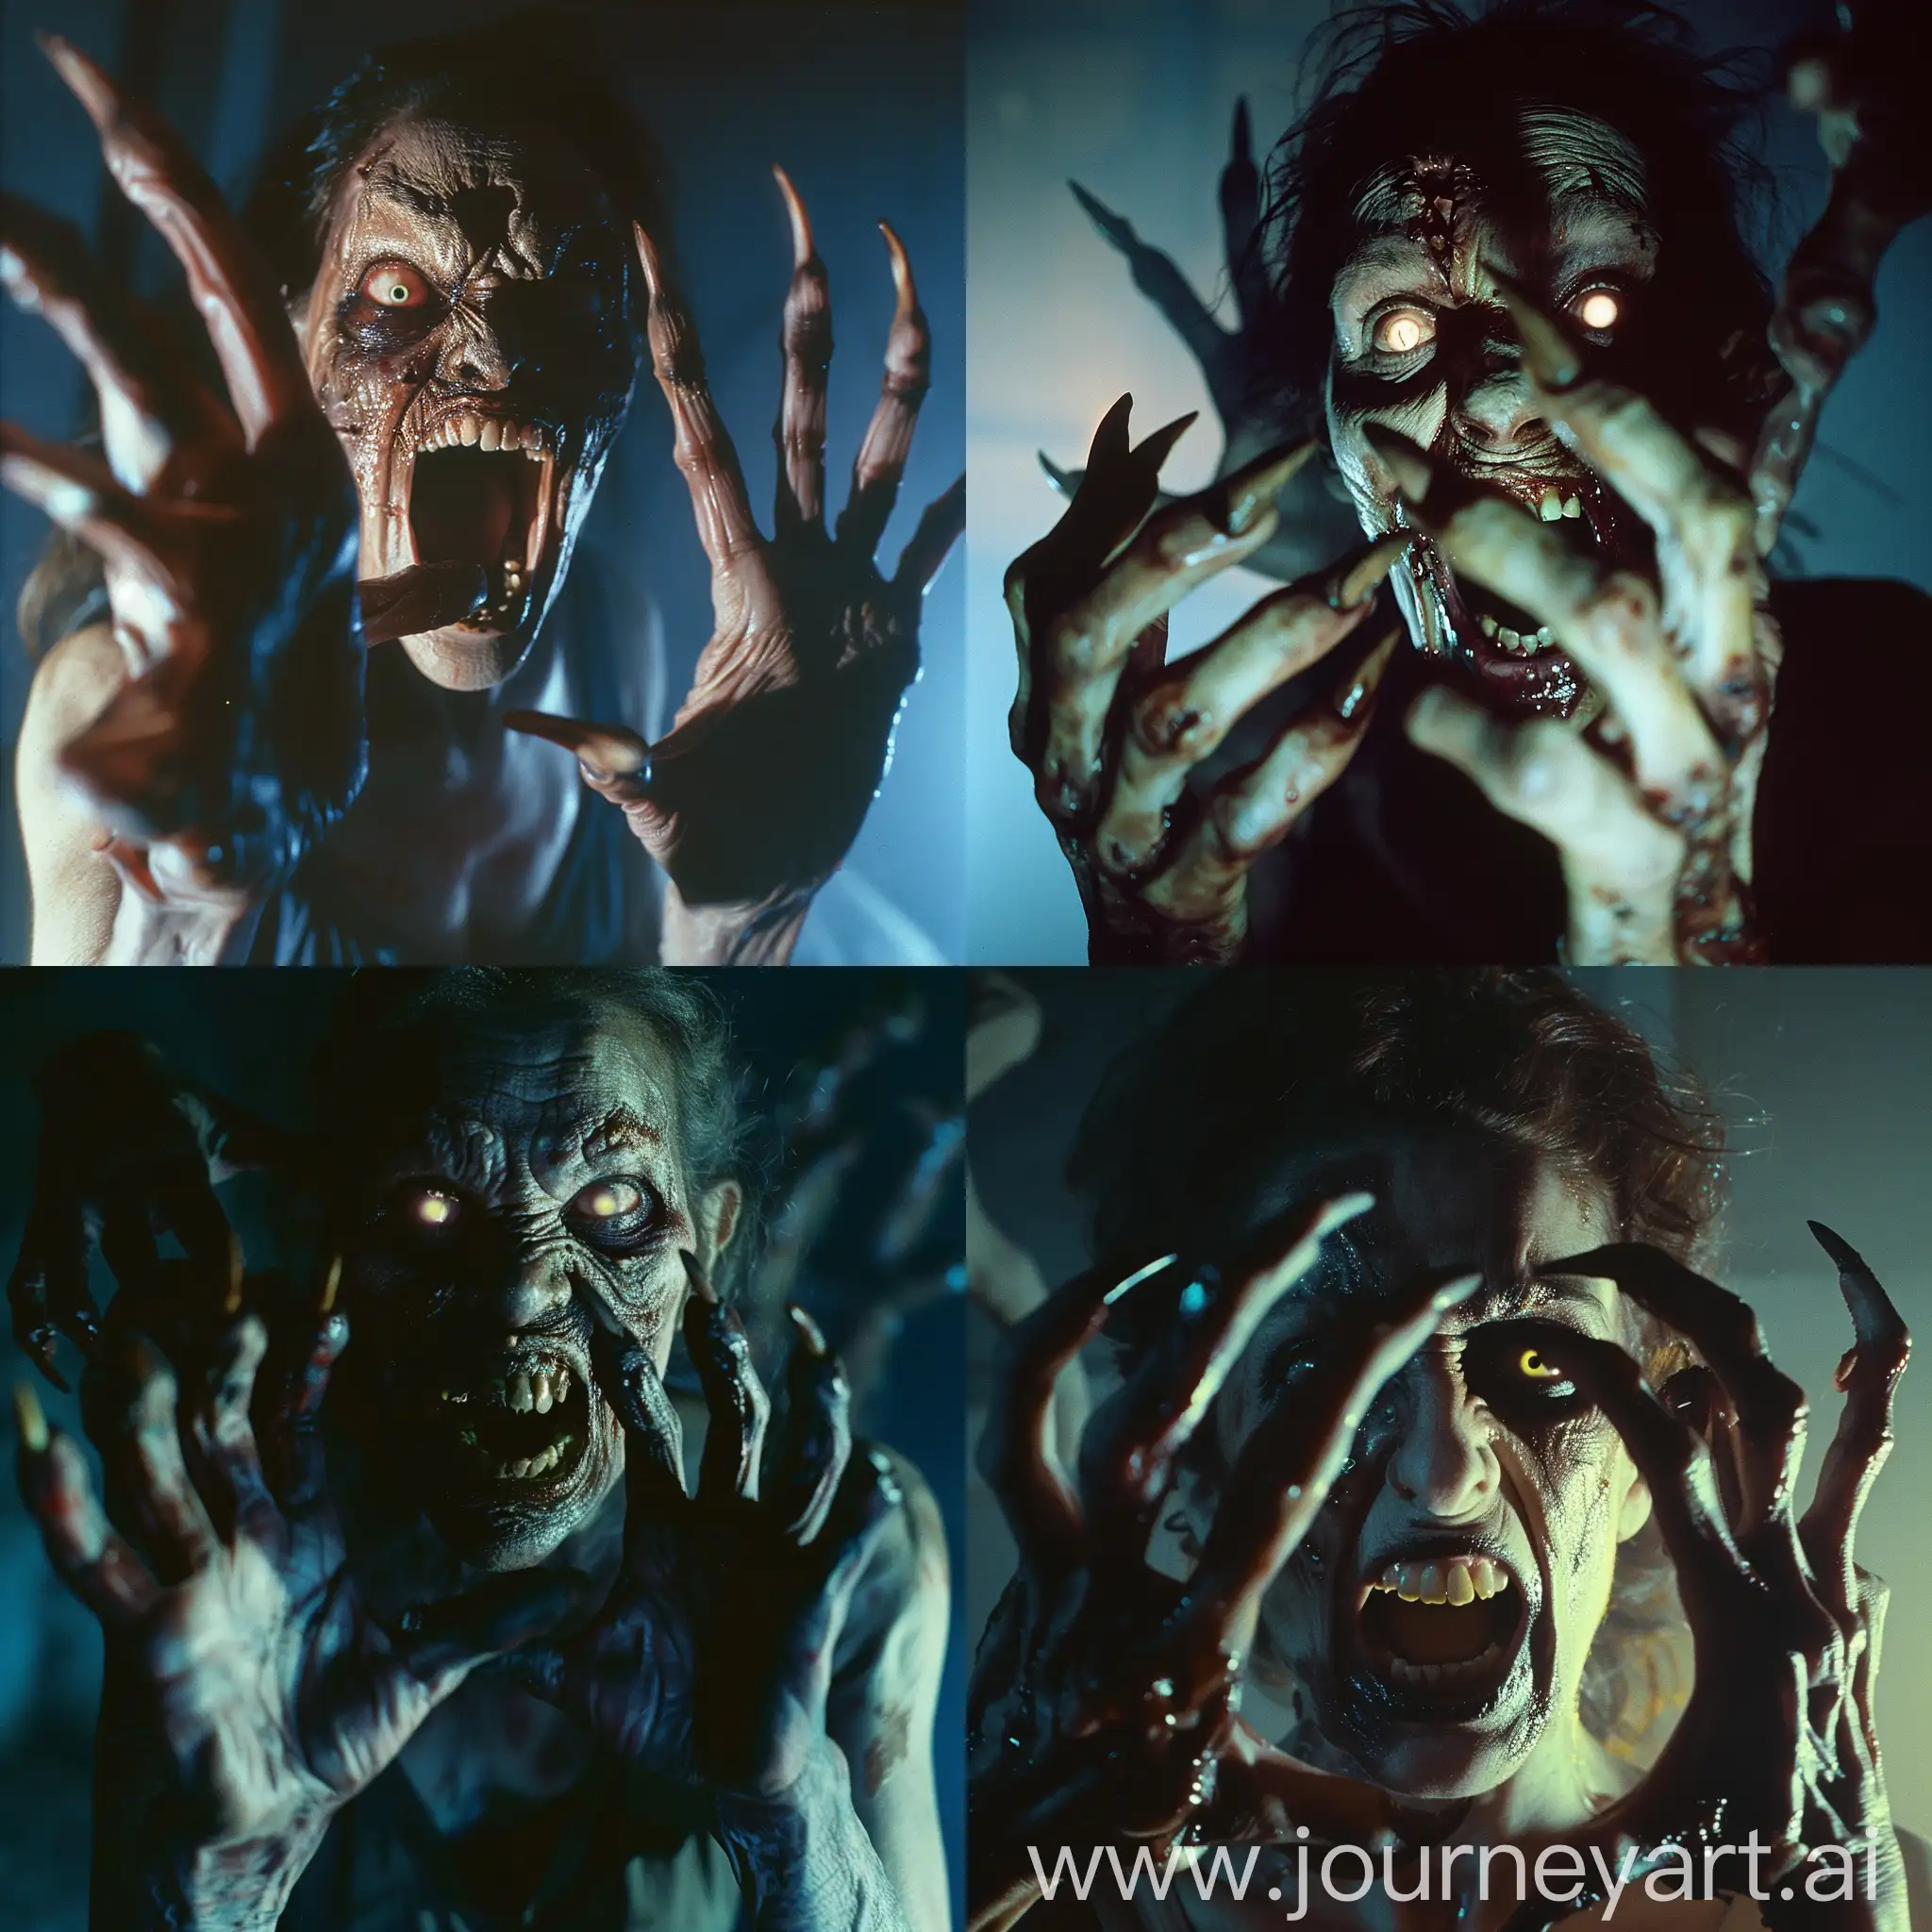 Sinister-Zombie-Woman-with-Glowing-Eyes-and-Menacing-Claws-in-the-Darkness